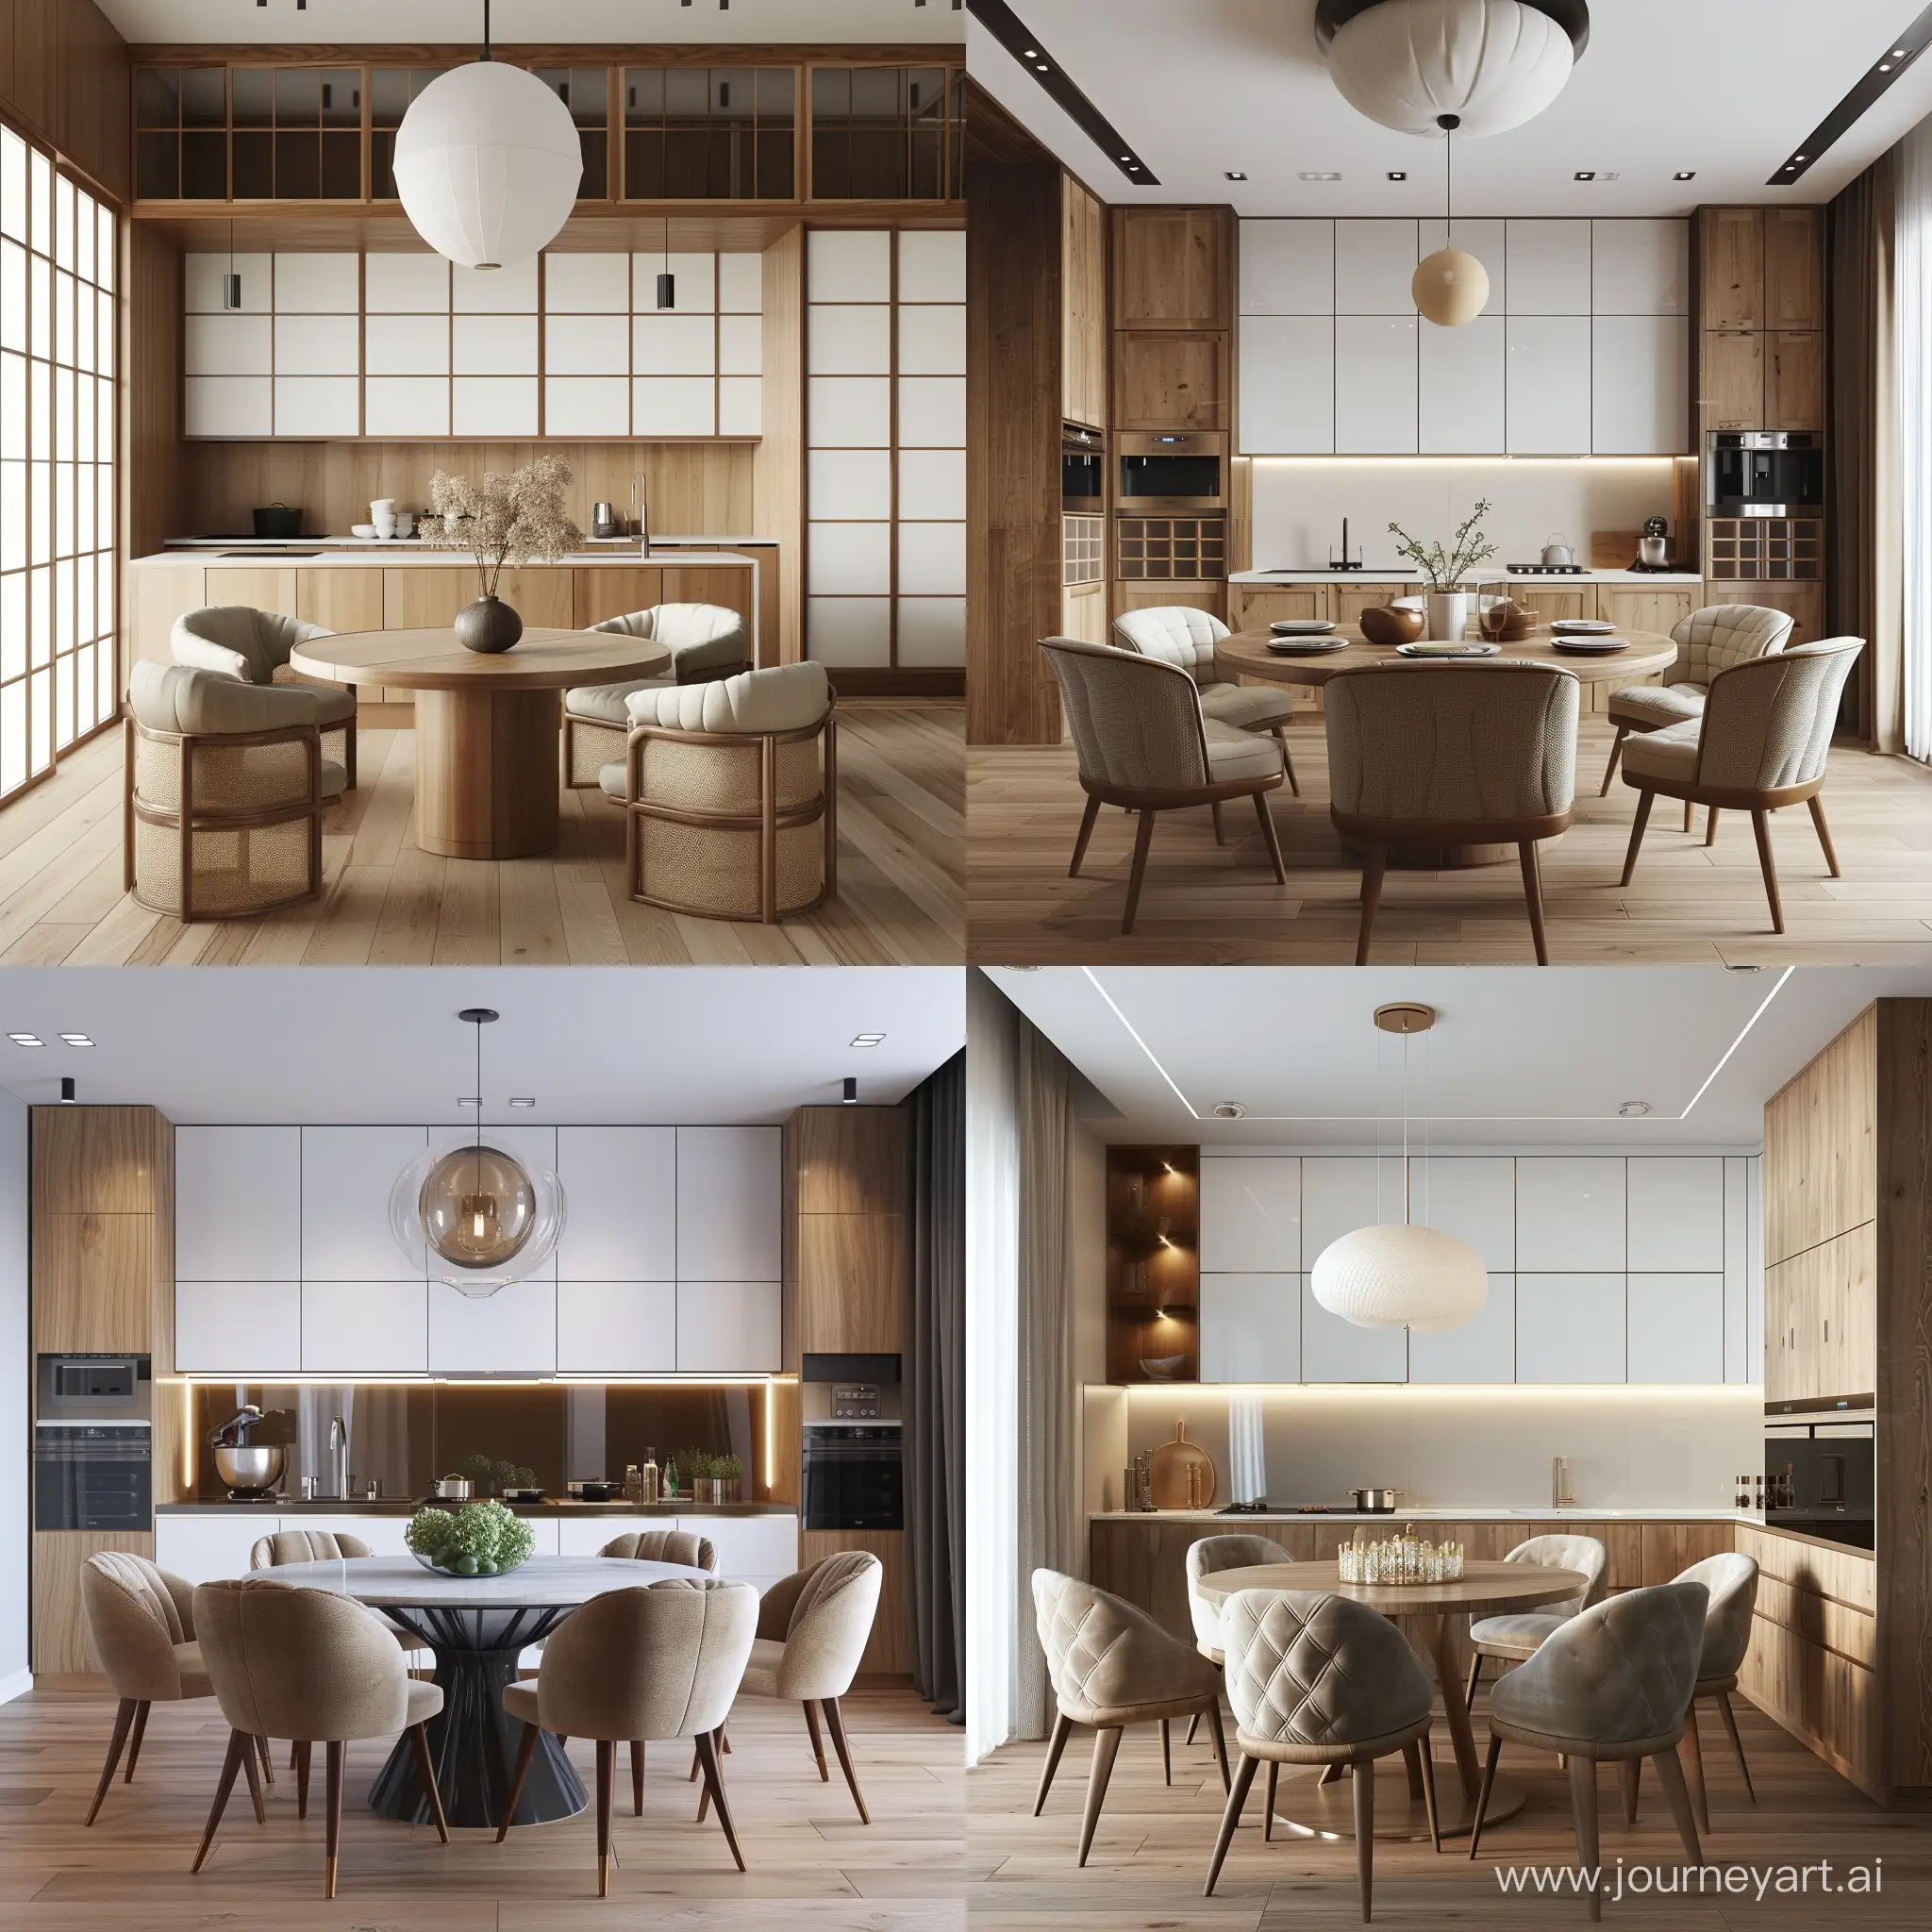 interior of a kitchen measuring 3m by 5m in Japandi style, The kitchen set is linear with white upper facades and lower facades in wood effect, In the center of the room there is a round table with upholstered chairs